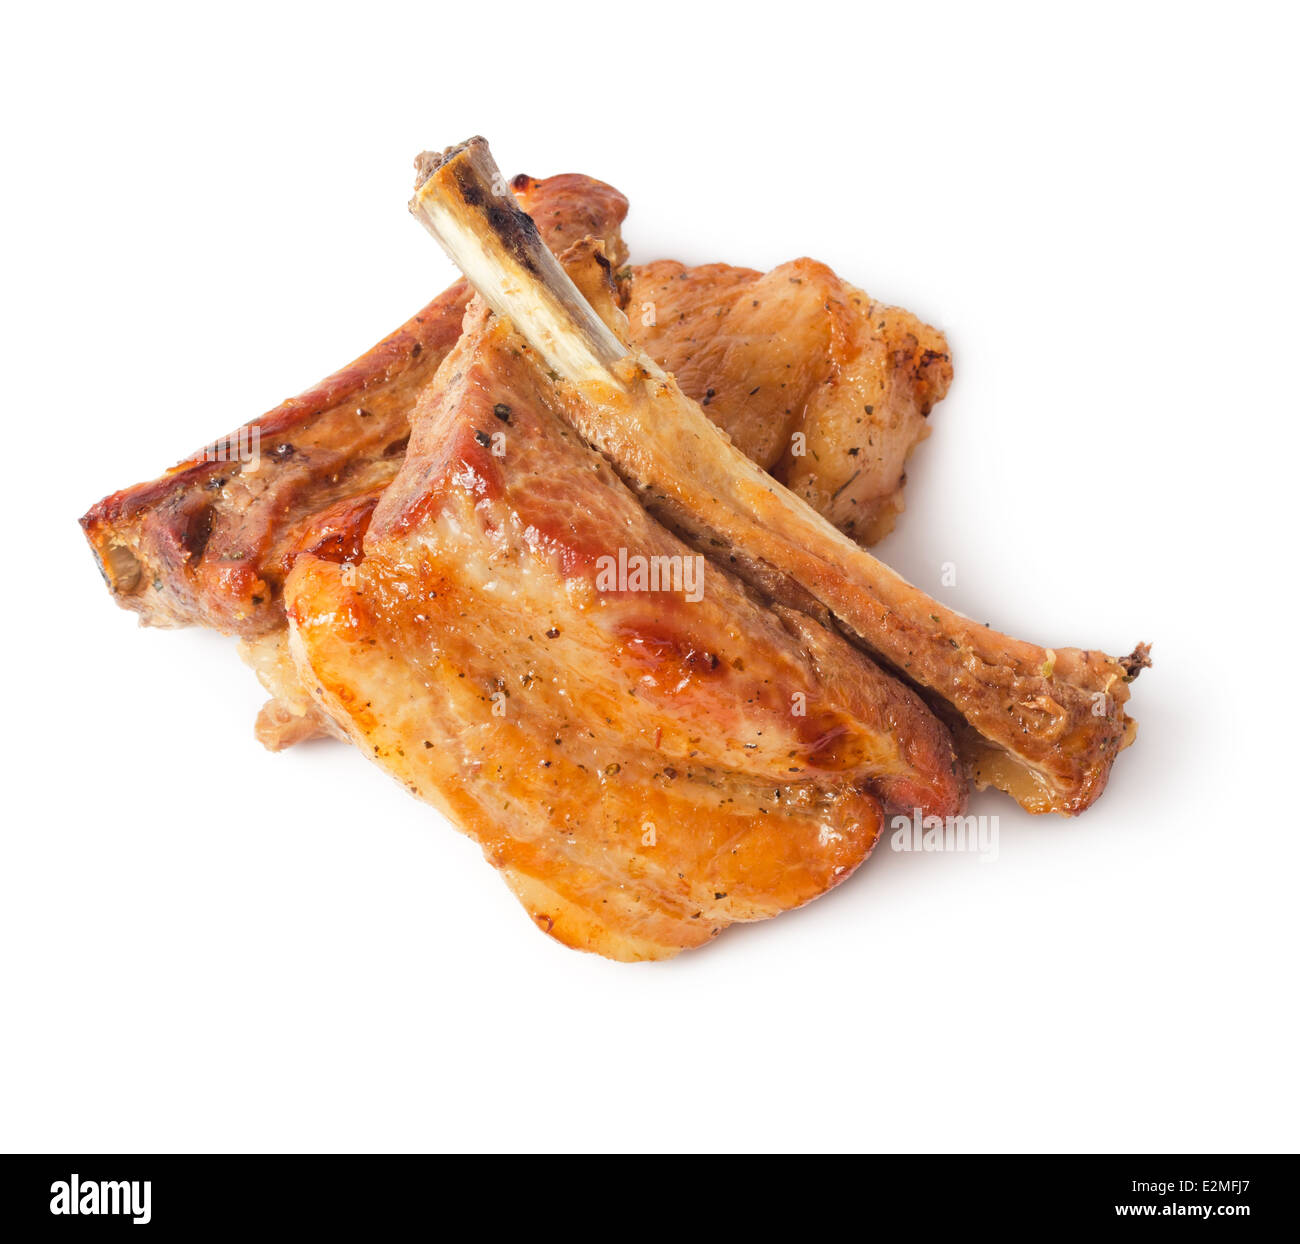 Grilled pork ribs isolated on white background Stock Photo